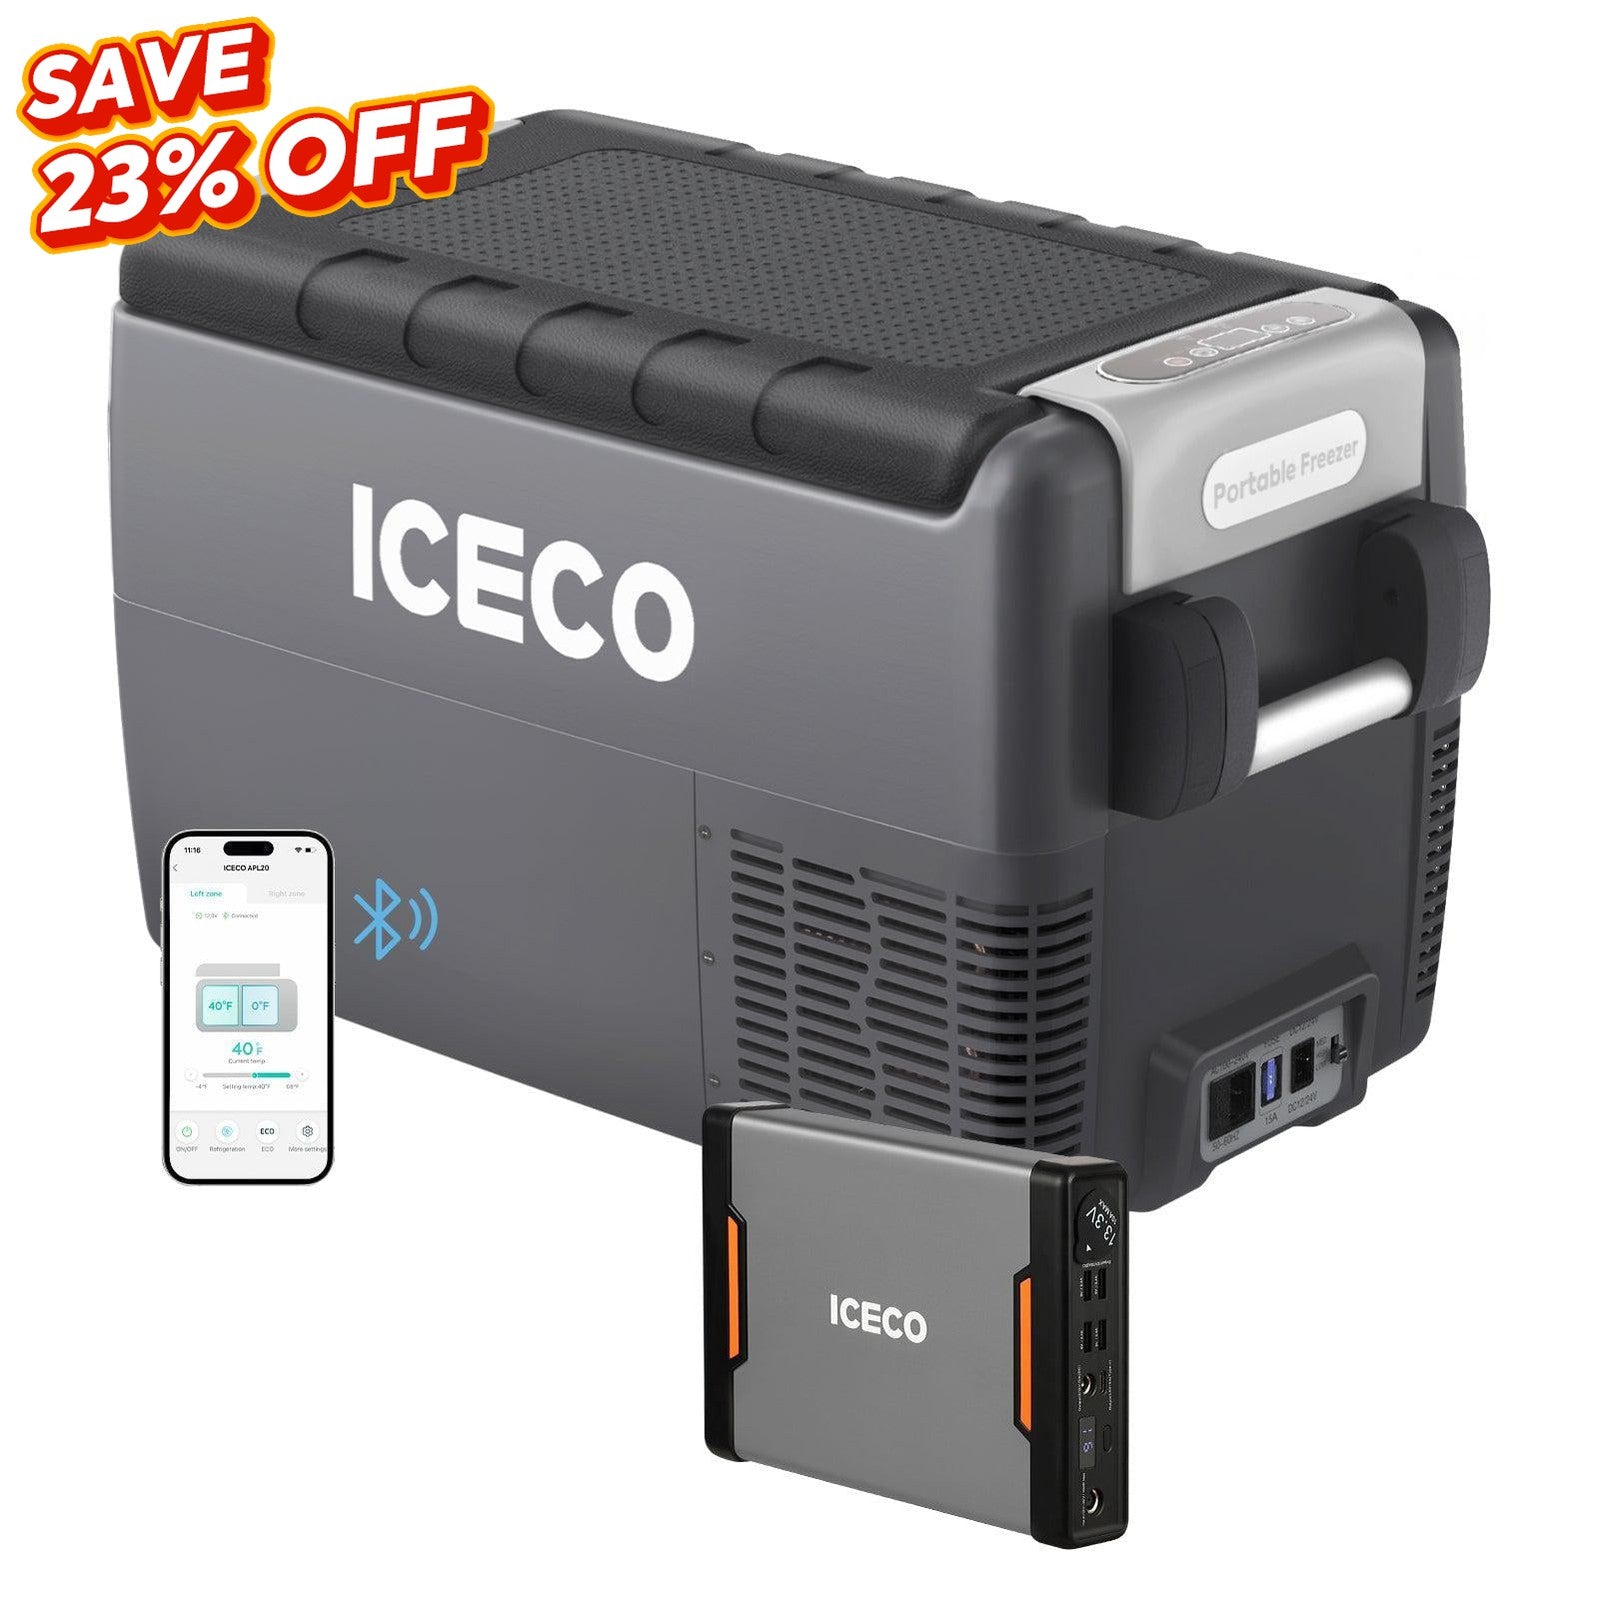 31.7QT JP30 12V APP Controlled Refrigerator with Portable Power Station | ICECO-Portable Fridge-www.icecofreezer.com